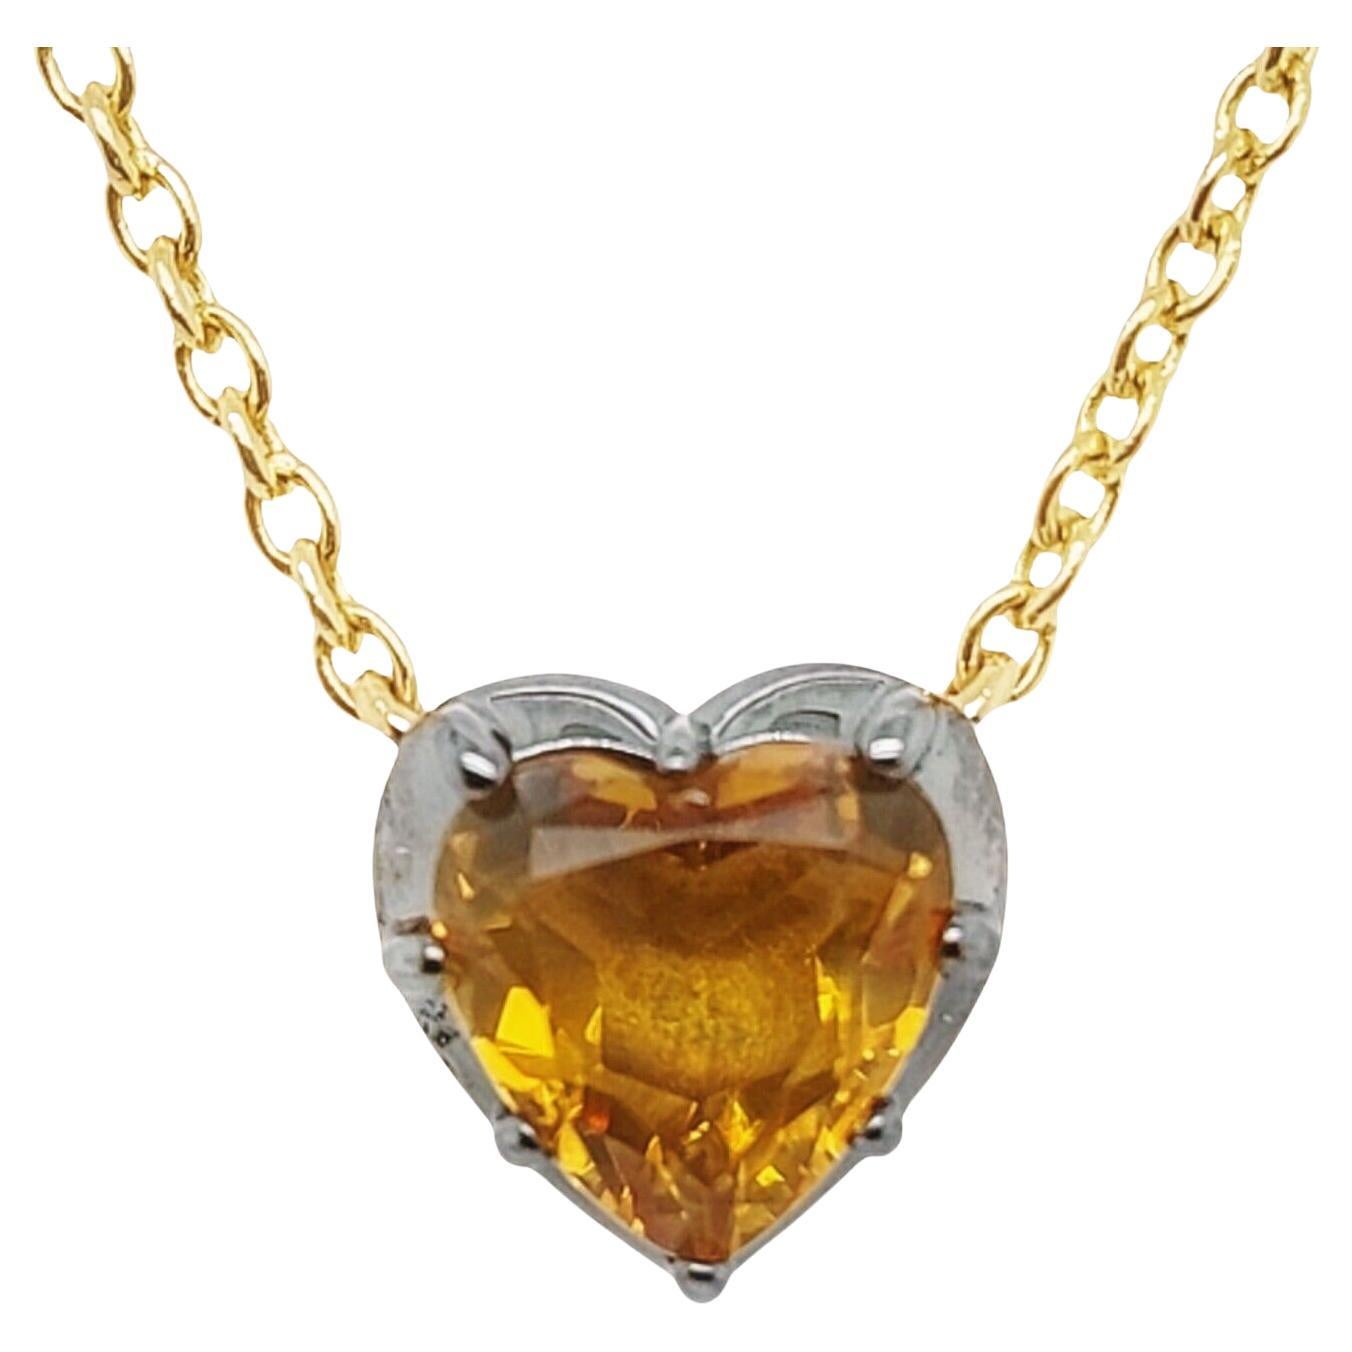 2.5ct Citrine Heart Set in 14ct Yellow Gold Chain For Sale